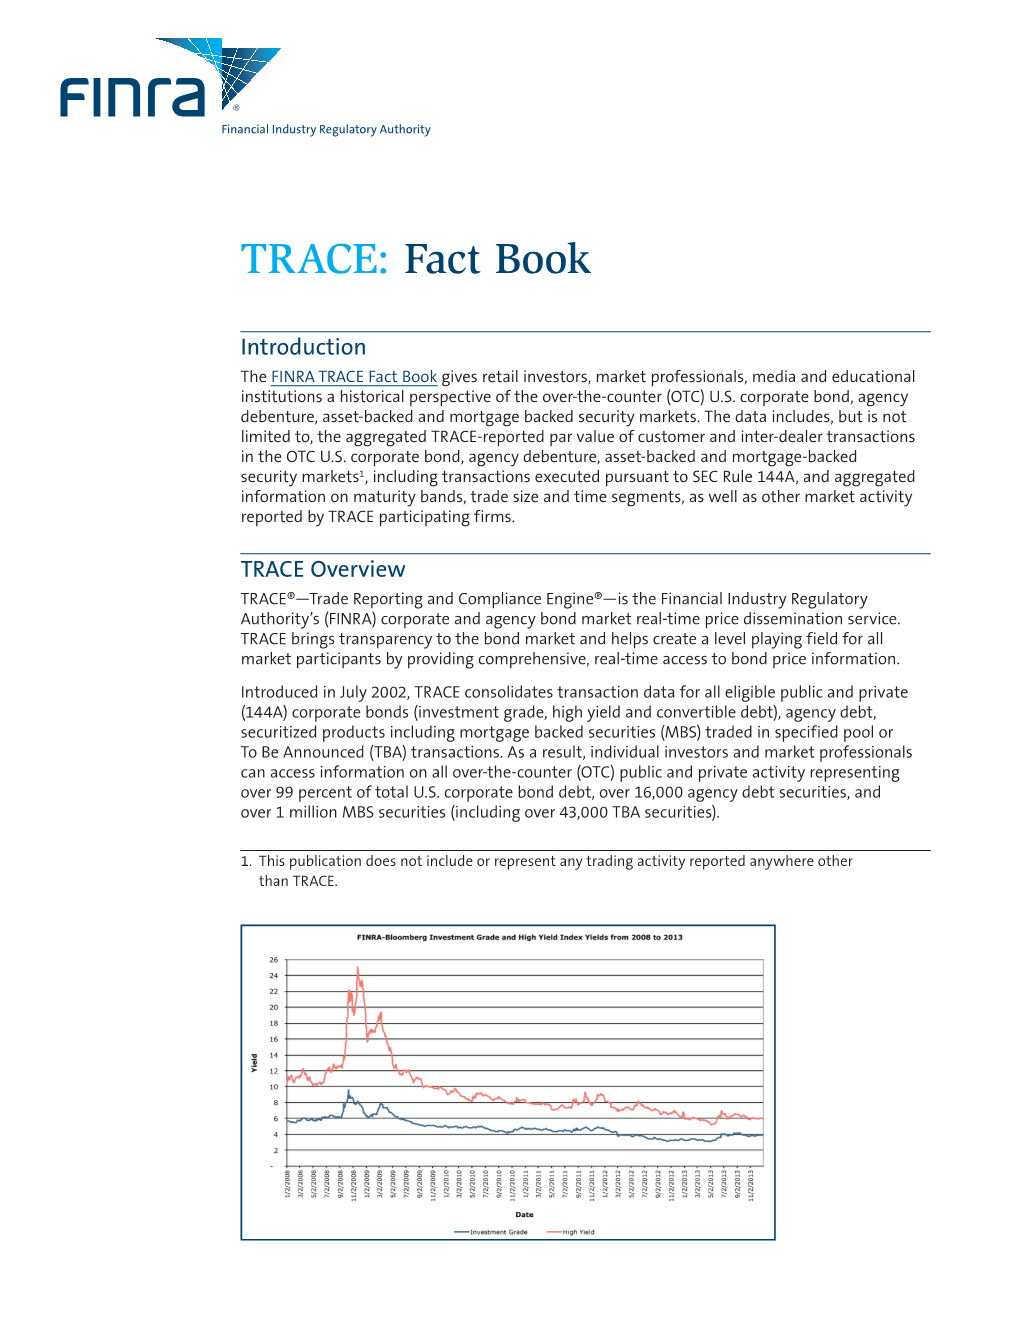 TRACE Fact Book Information